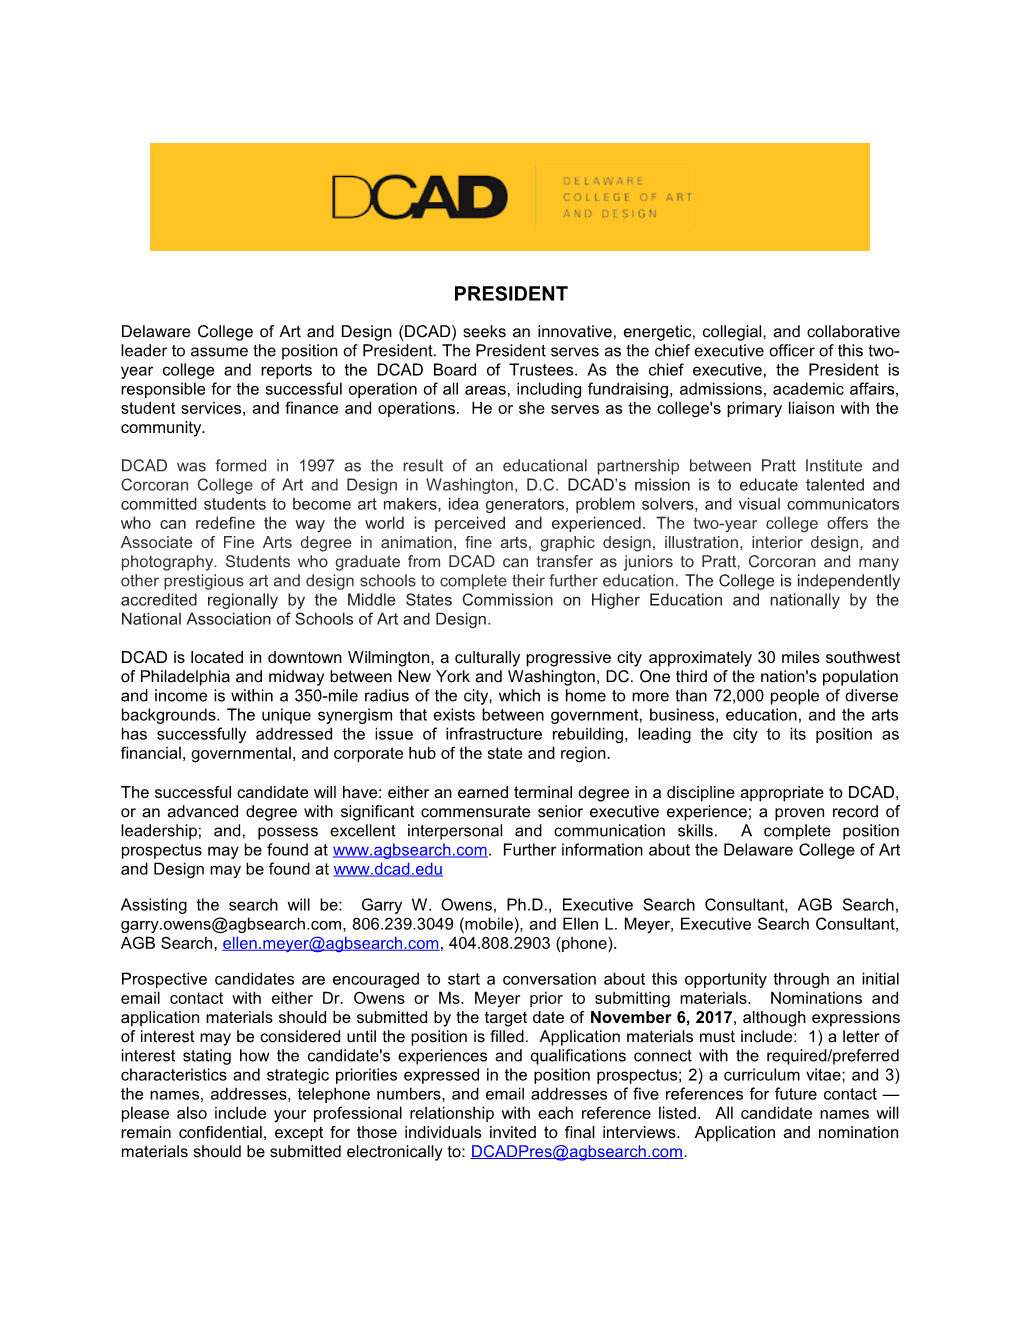 Delaware College of Art and Design (DCAD) Seeks an Innovative, Energetic,Collegial, And